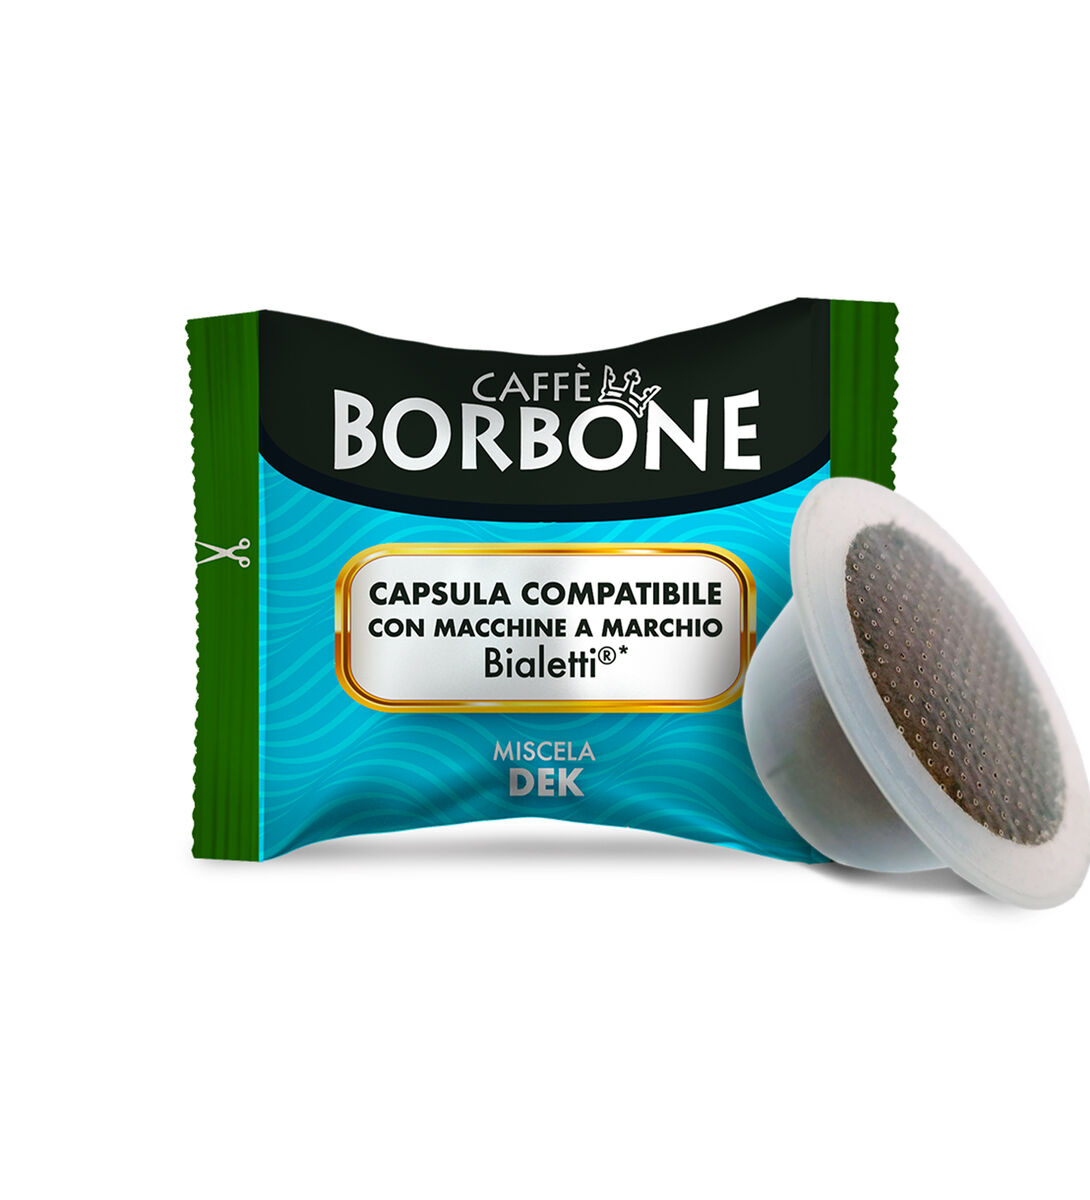 Borbone Capsules Dek Blend compatible with Bialetti®* brand machines